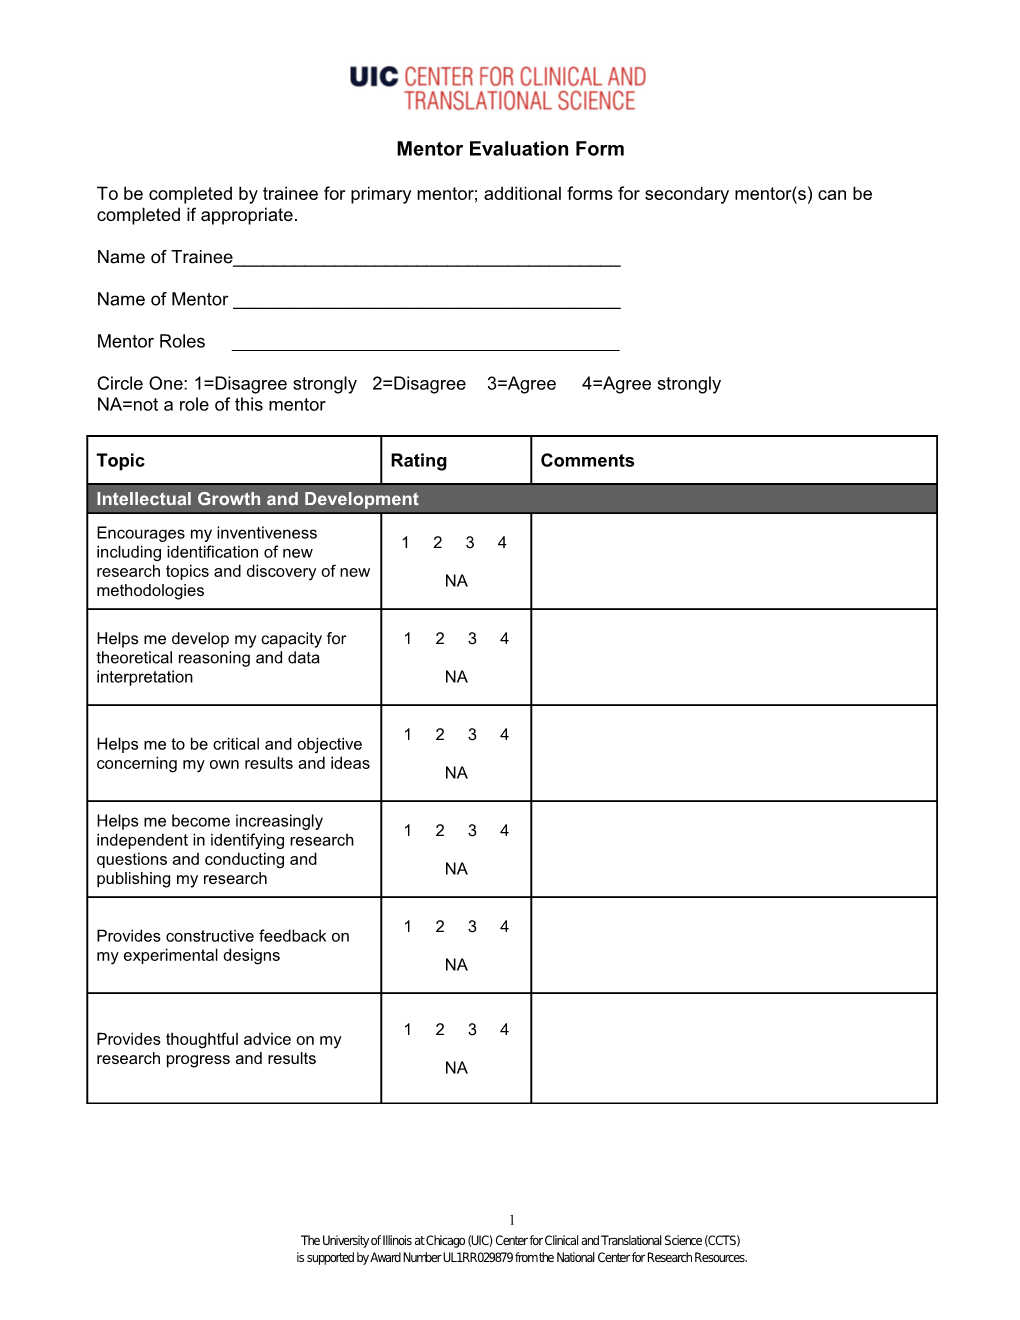 CCTS Mentor Evaluation Form